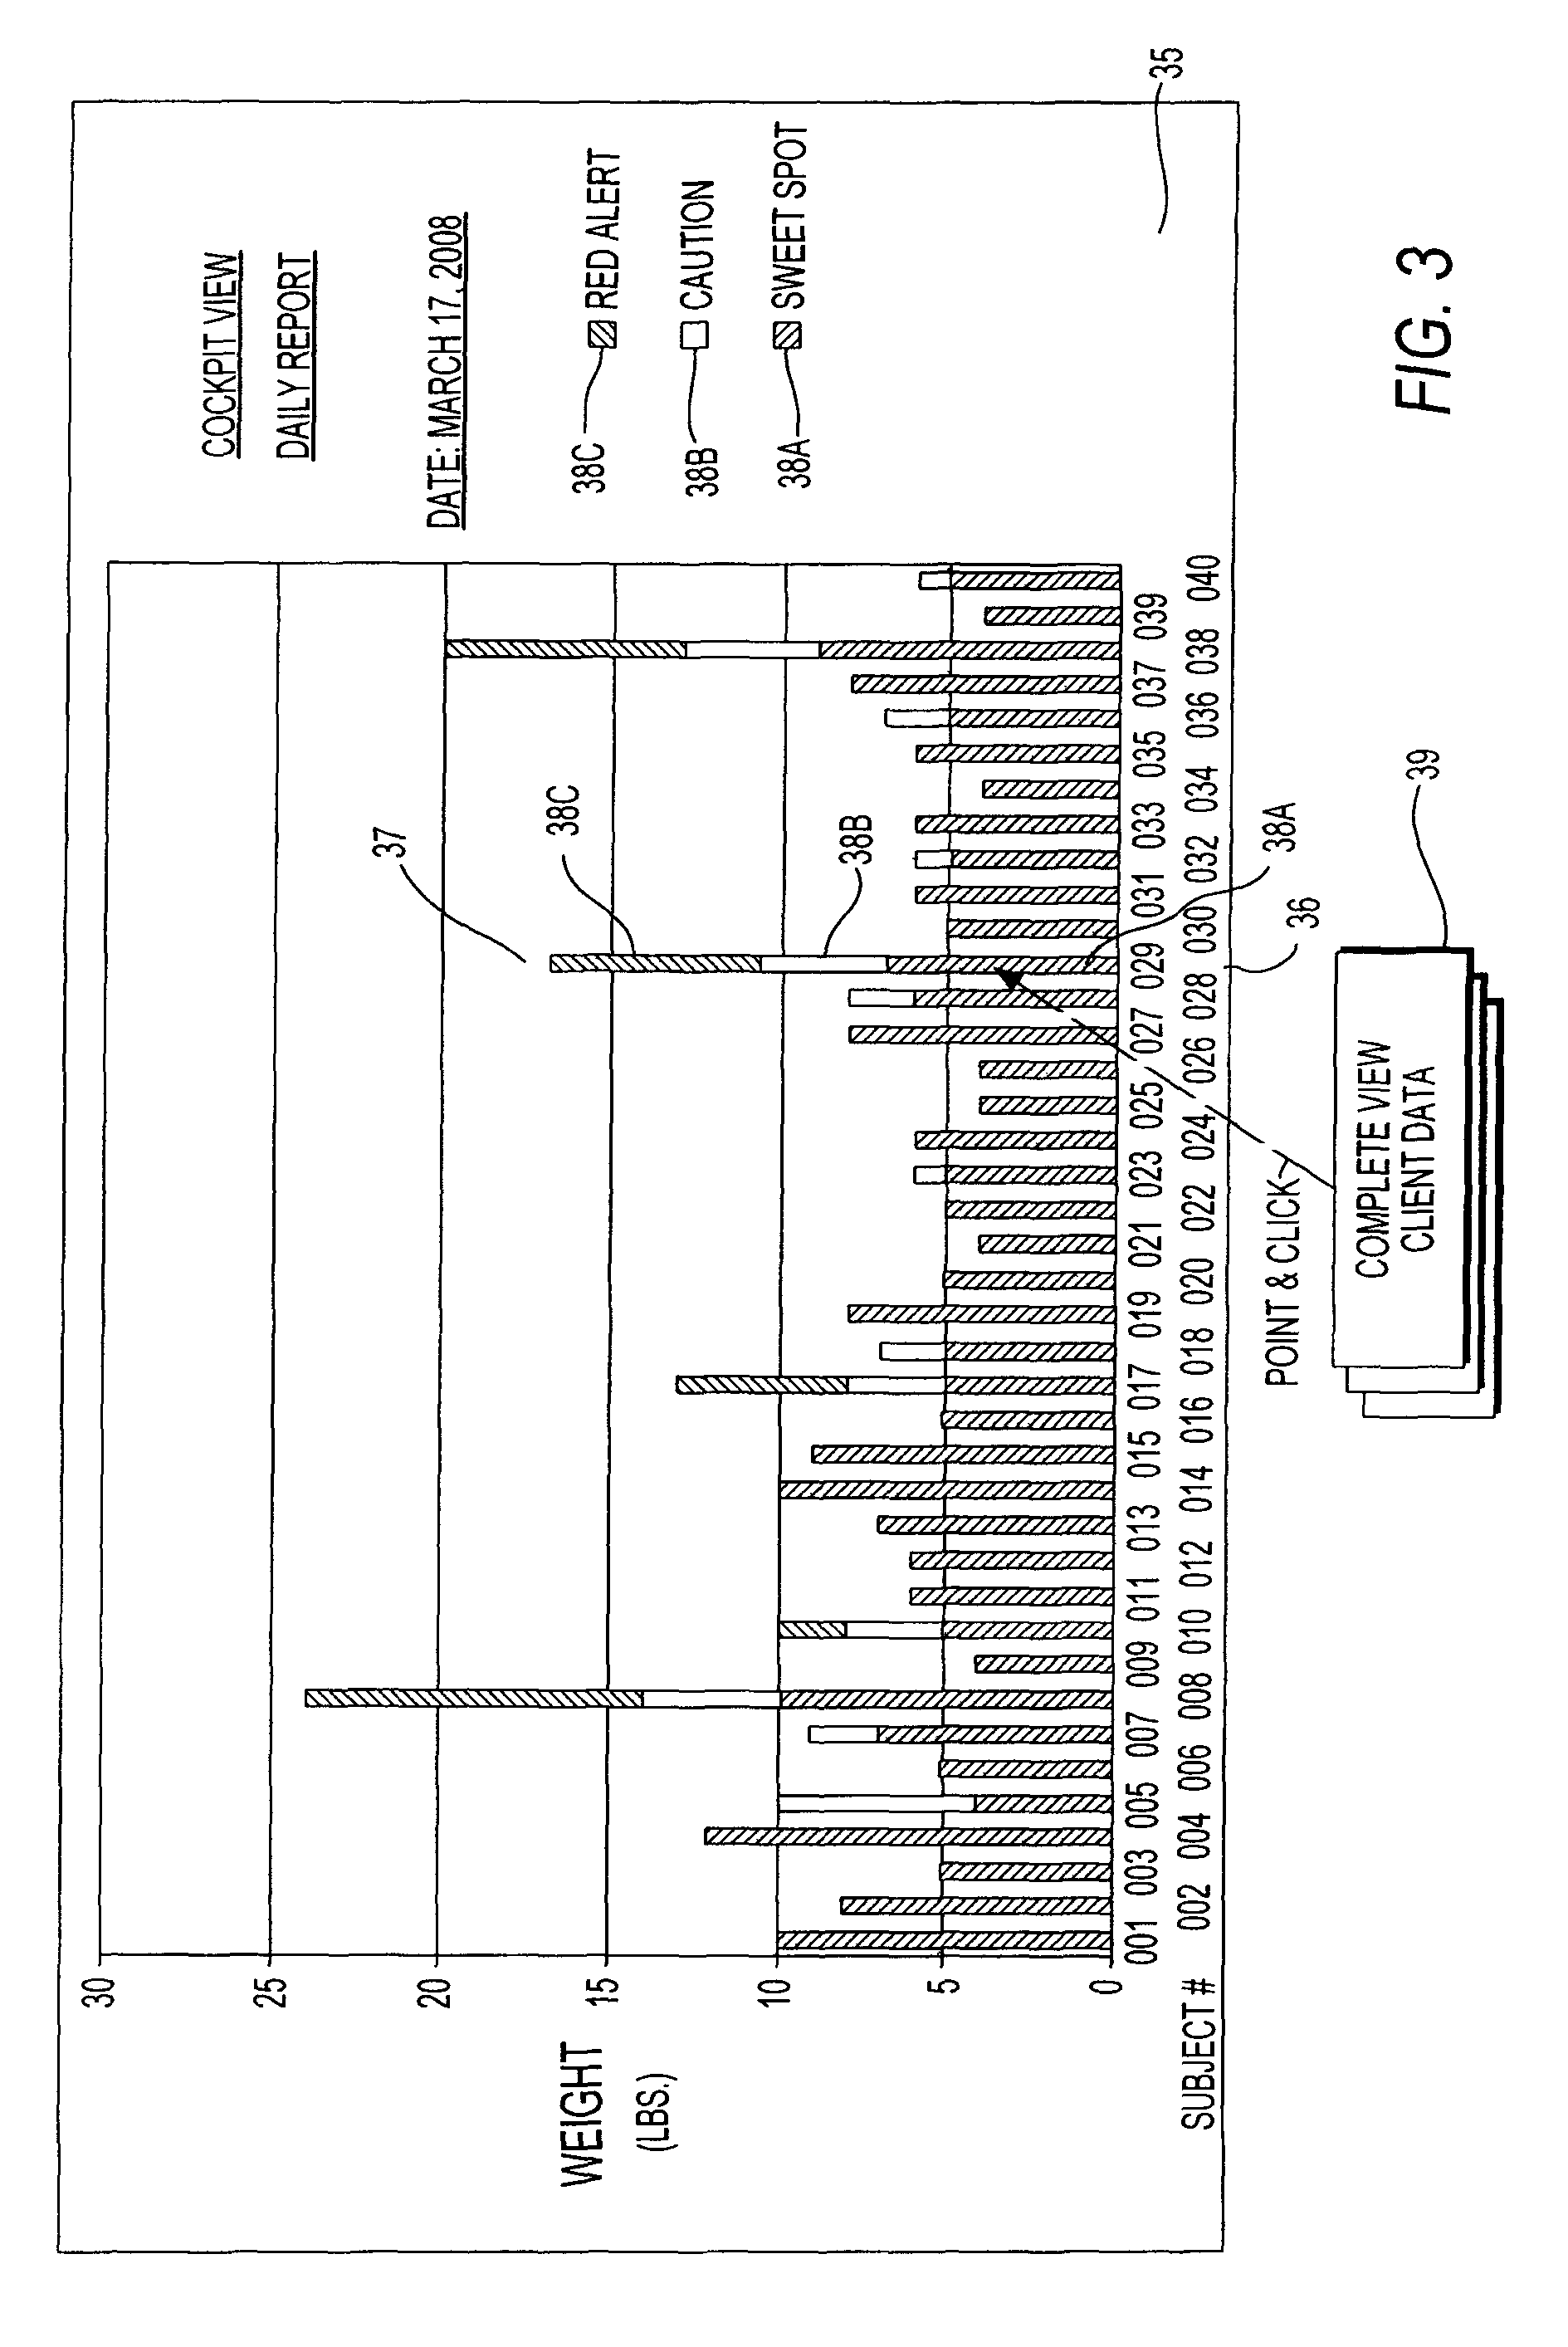 Weight management system using zero-readout weight sensor device and method of using same